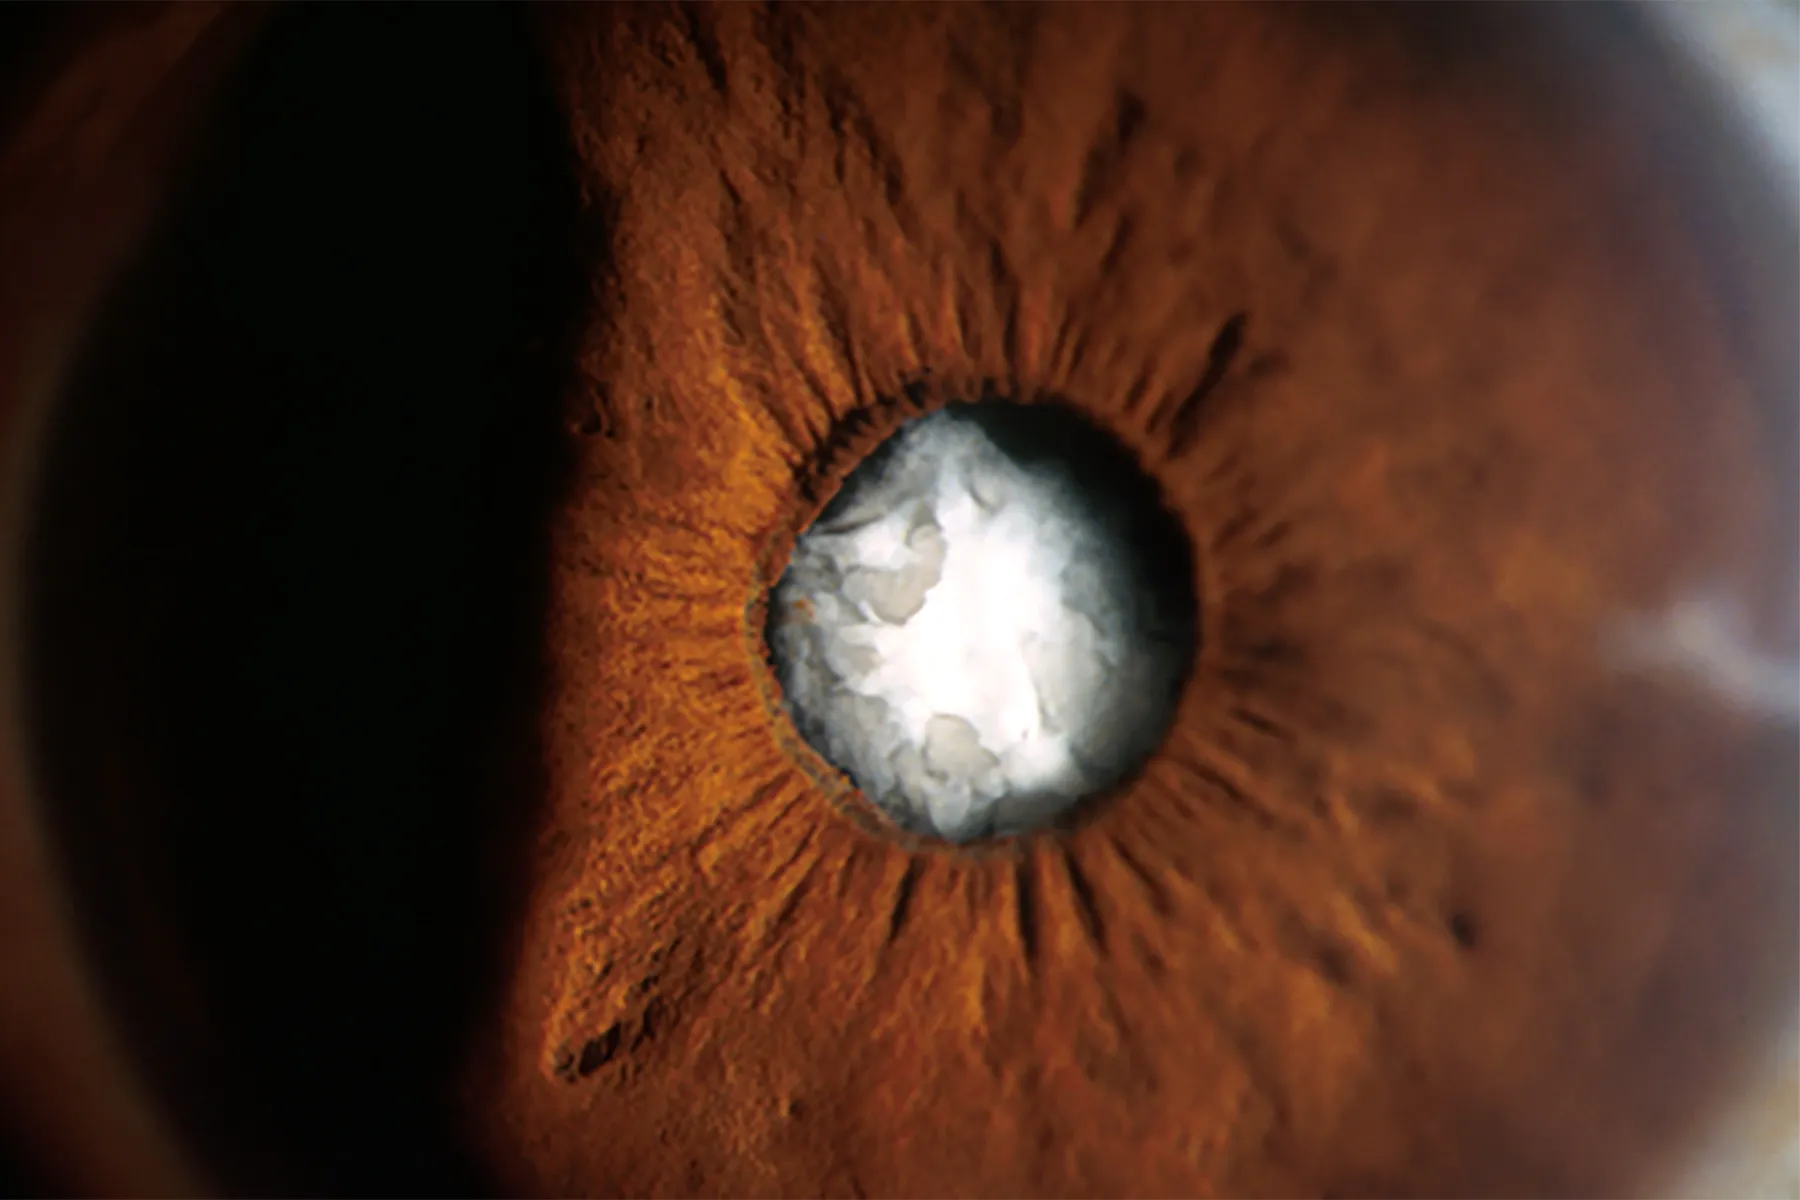 cataract-surgery-tricky-for-those-with-past-radial-keratotomy